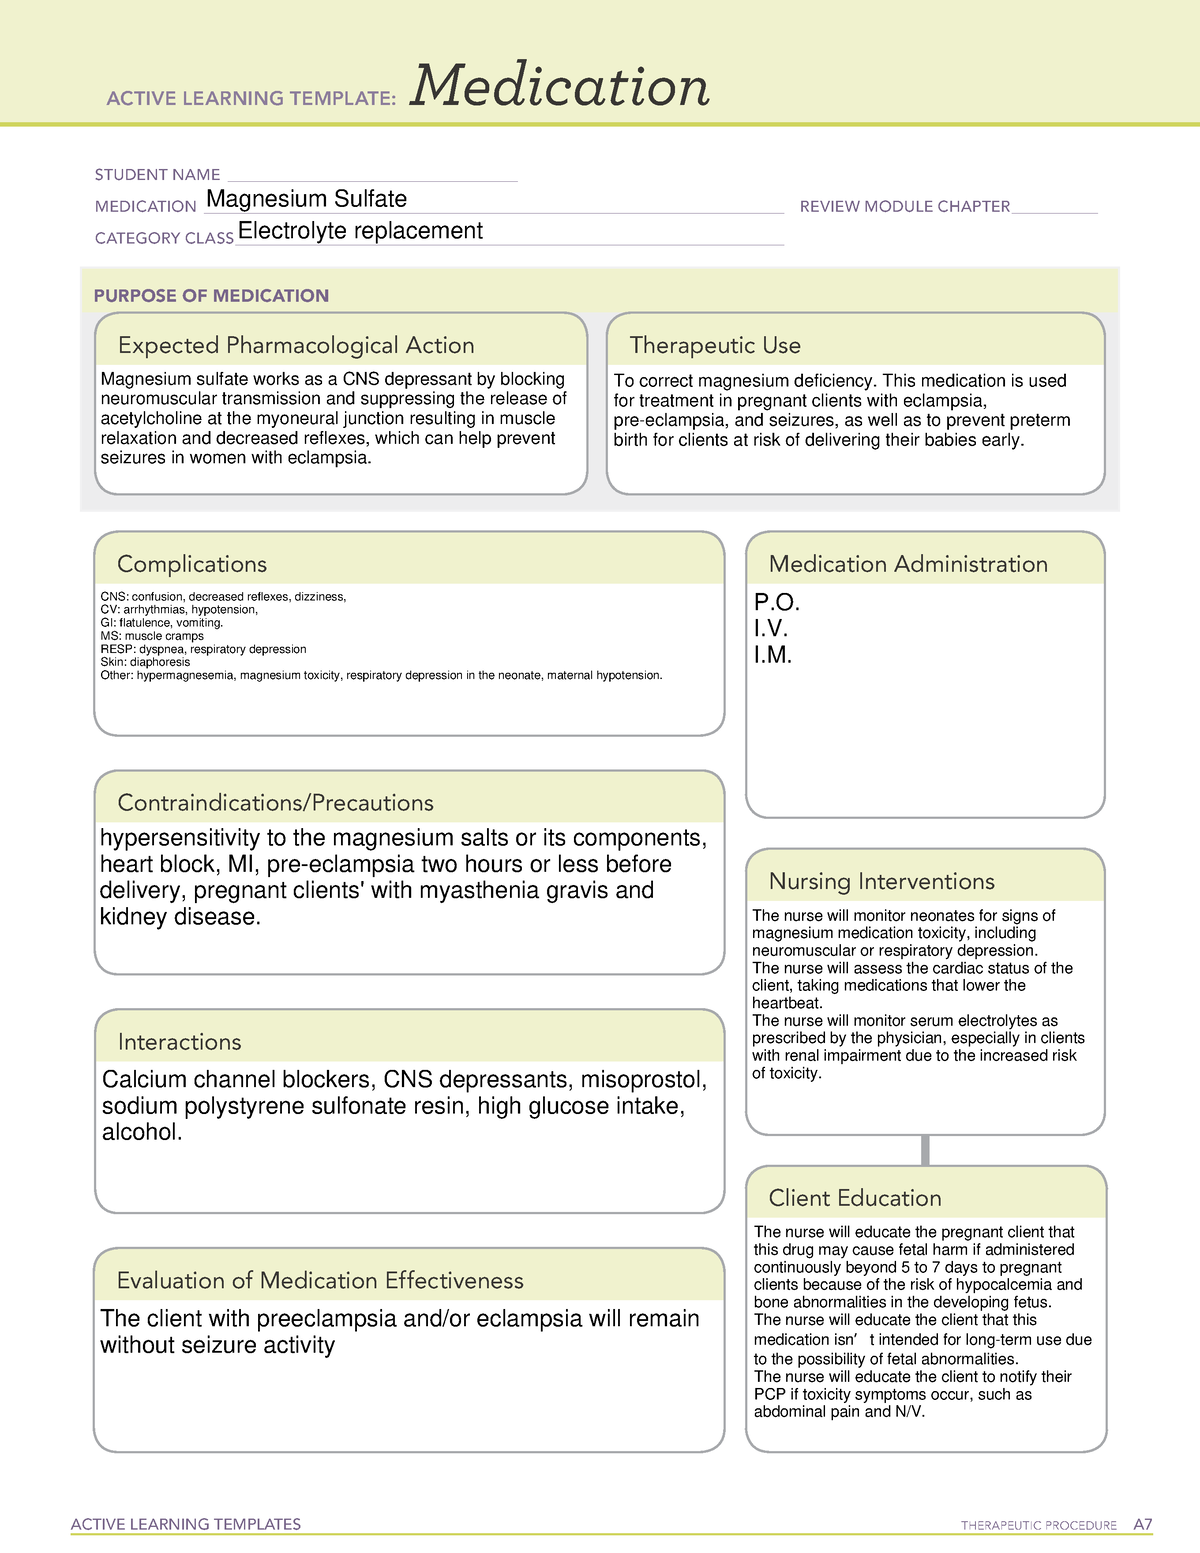 magnesium-sulfate-medication-active-learning-templates-therapeutic